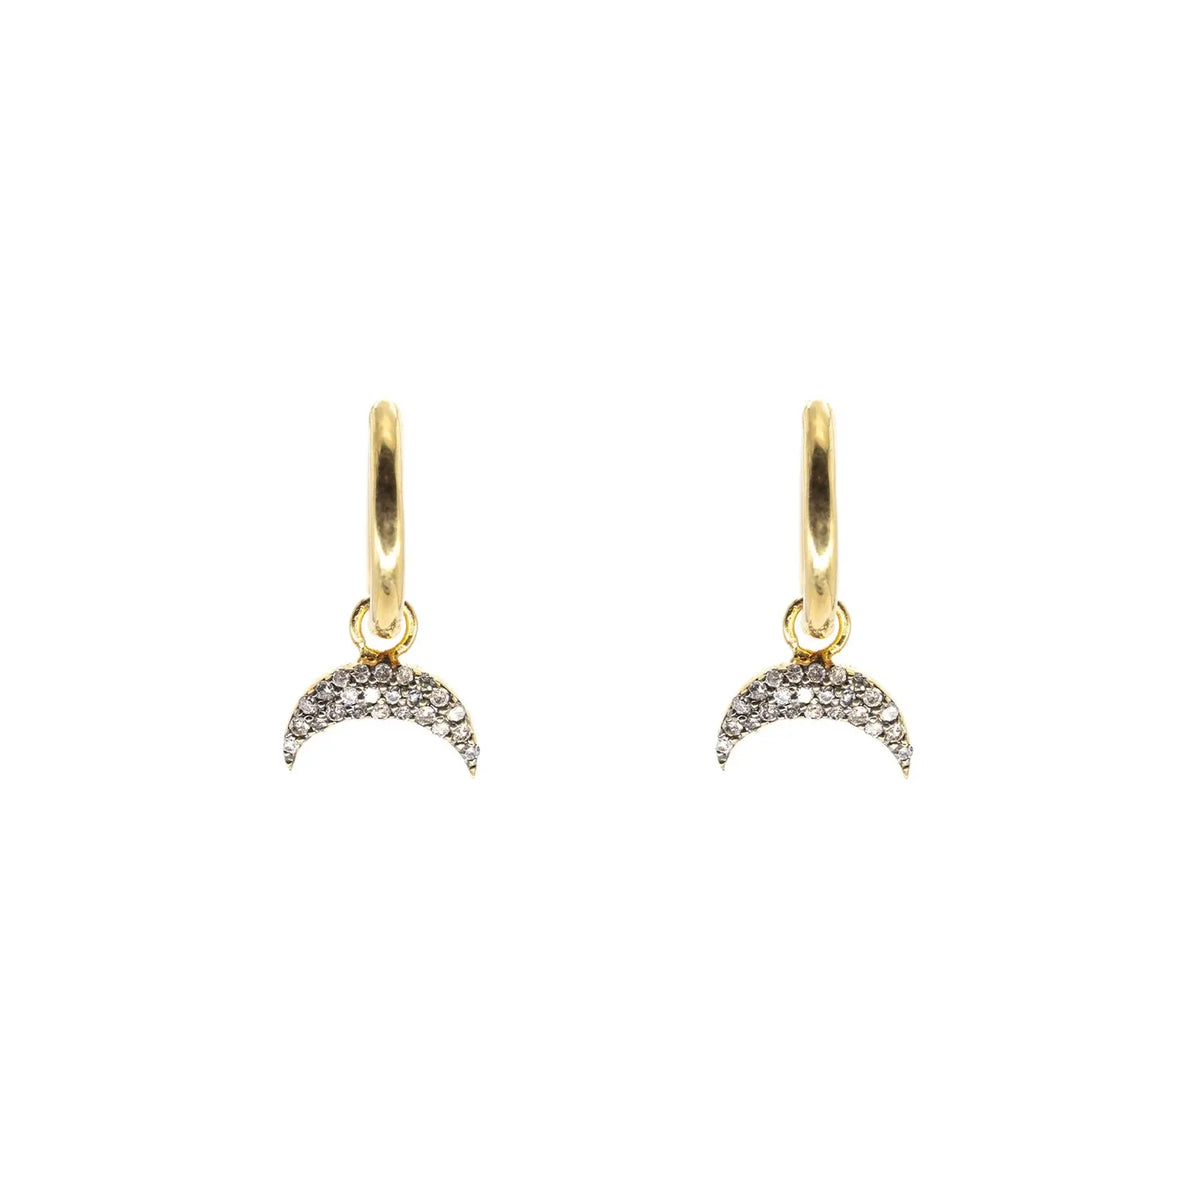 Gold plated hoops with pave diamond horn charm